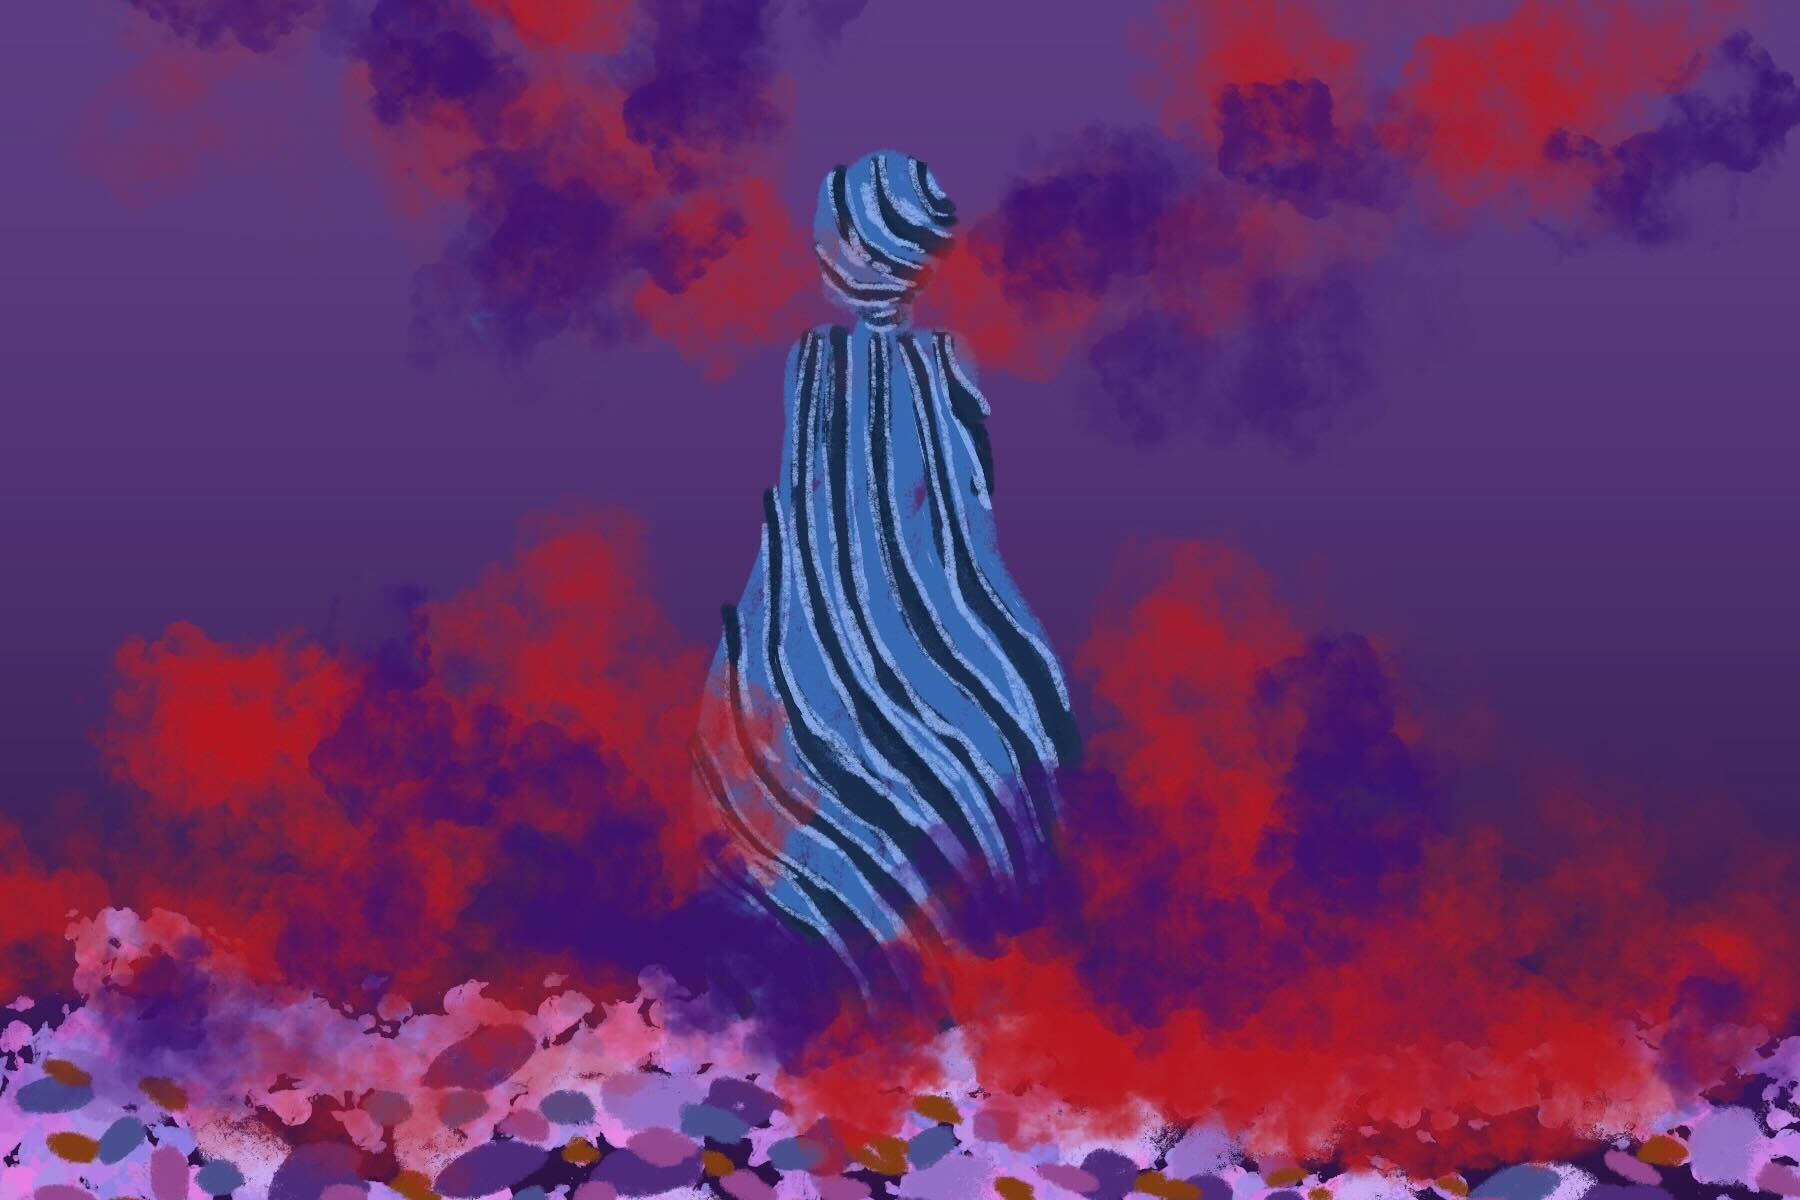 An article on 'Three Thousand Years of Longing' has a drawing of a blue tie-like object floating among clouds of red and purple